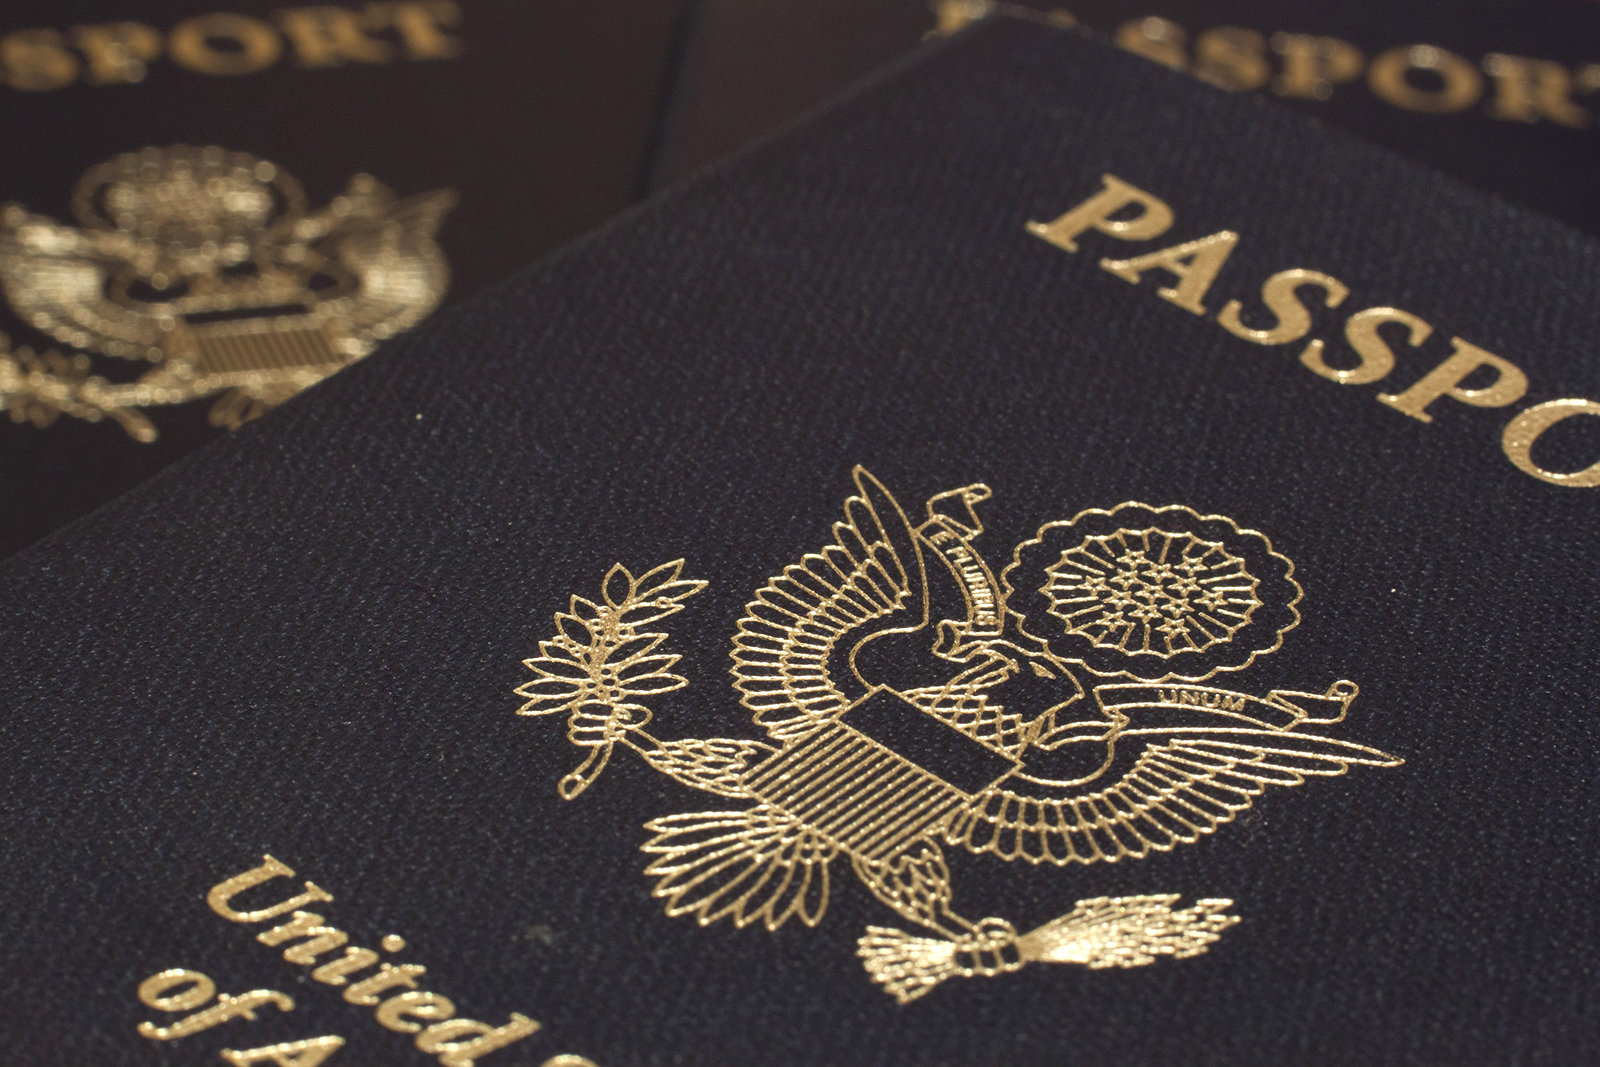 Clerk’s office to hold special Passport Saturday event on April 1